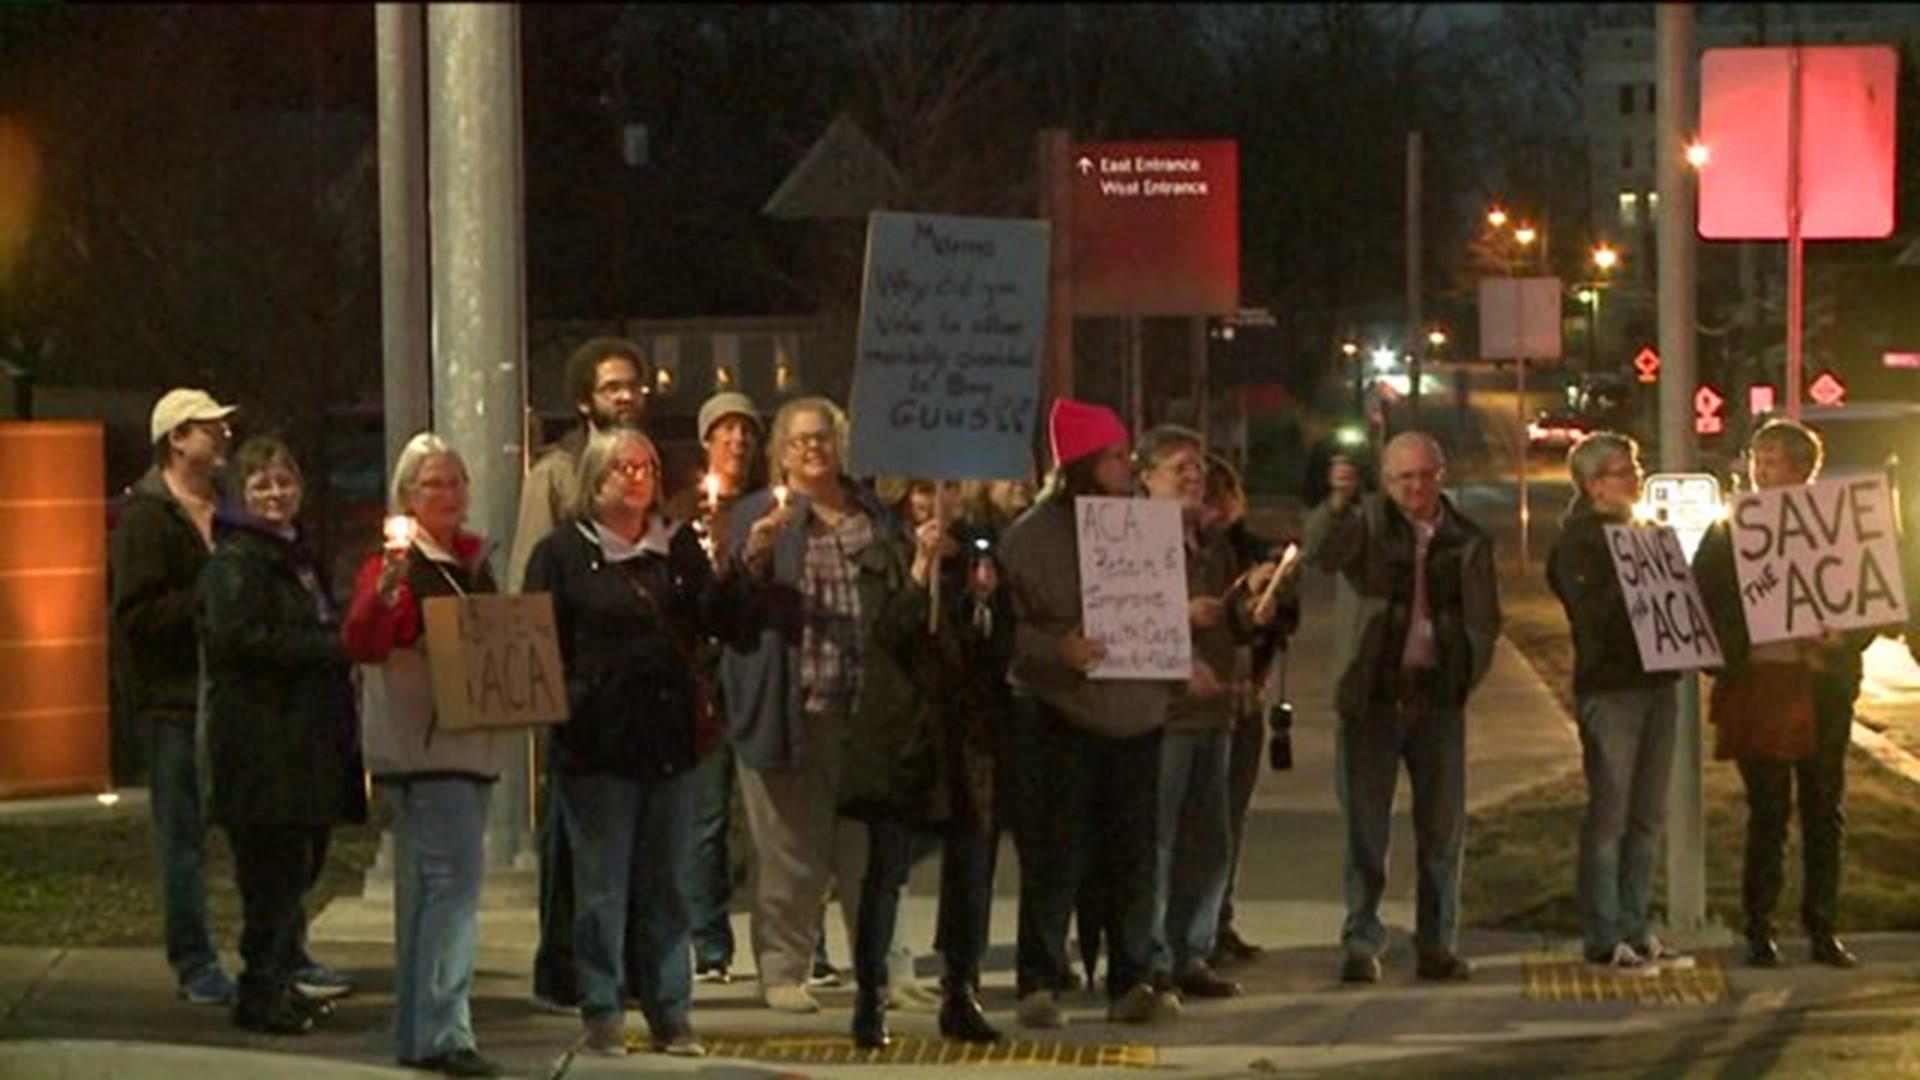 Protesters Picket Healthcare Repeal Outside Hospital Where Congressman Marino Met With Doctors